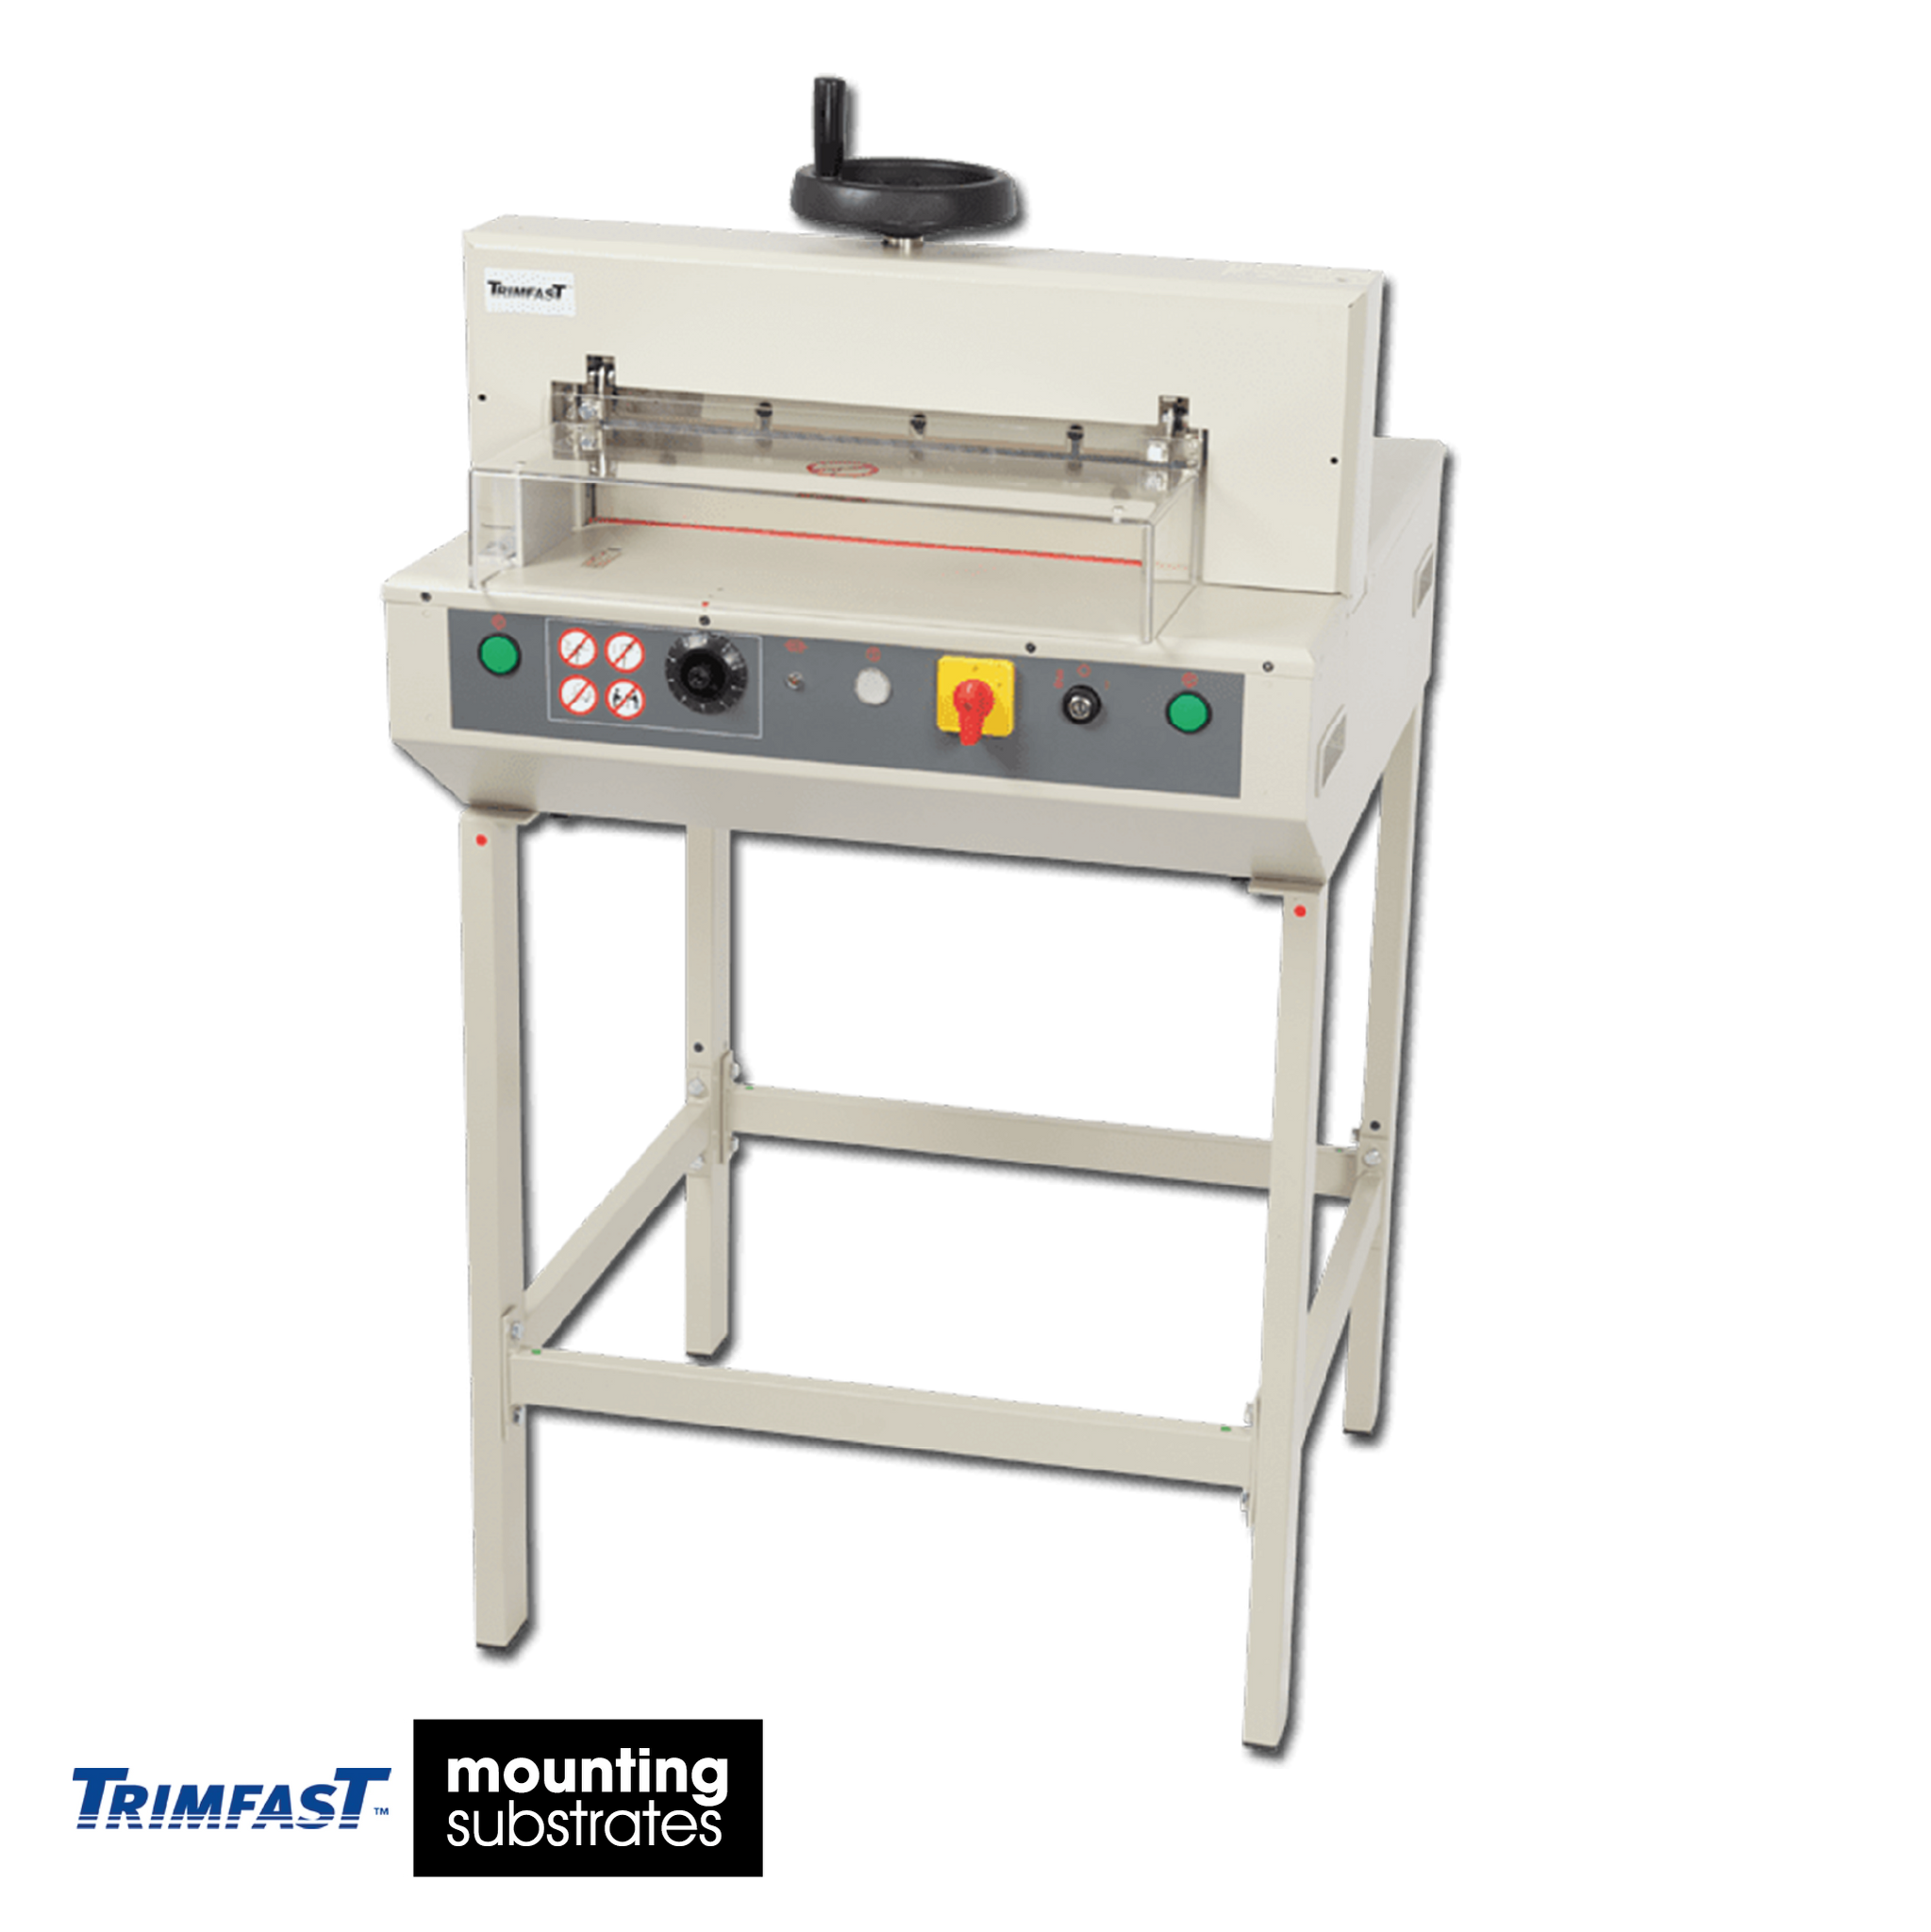 Electric Trimfast Ream Cutter for cutting up to 450 sheets at a time